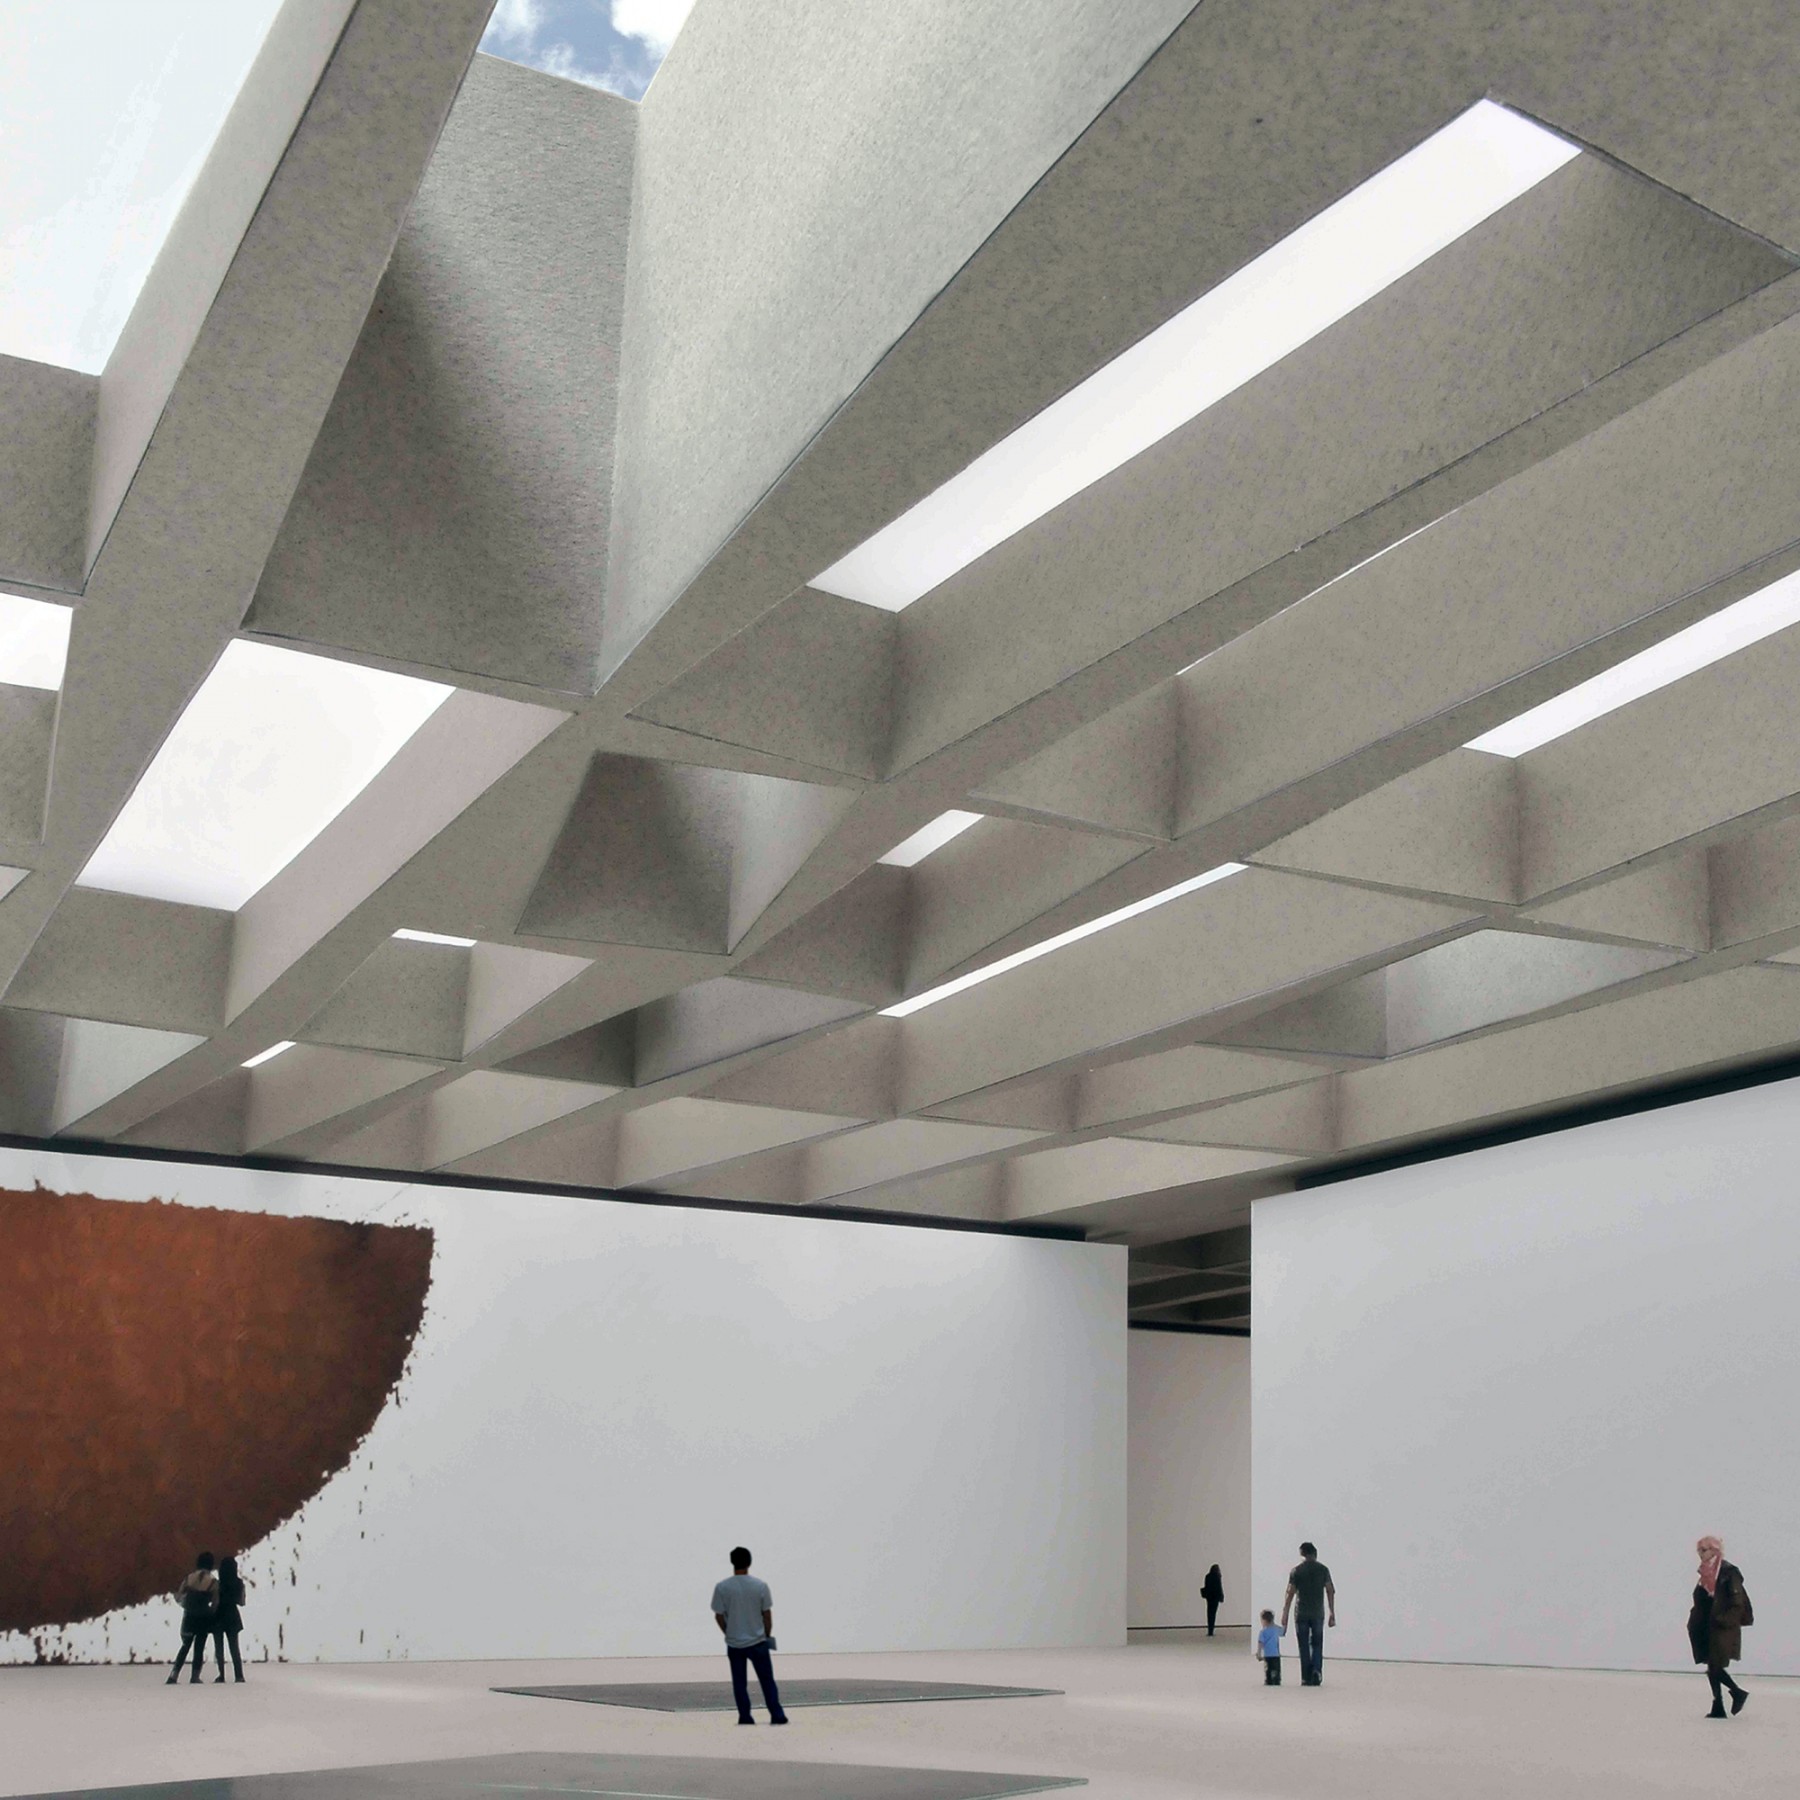 Victoria-and-Albert-Museum-V&A-competition-Exhibition-Road-gallery-London-Sir-Aston-Webb-design-short-list-Jamie-Fobert-architects-interior-1